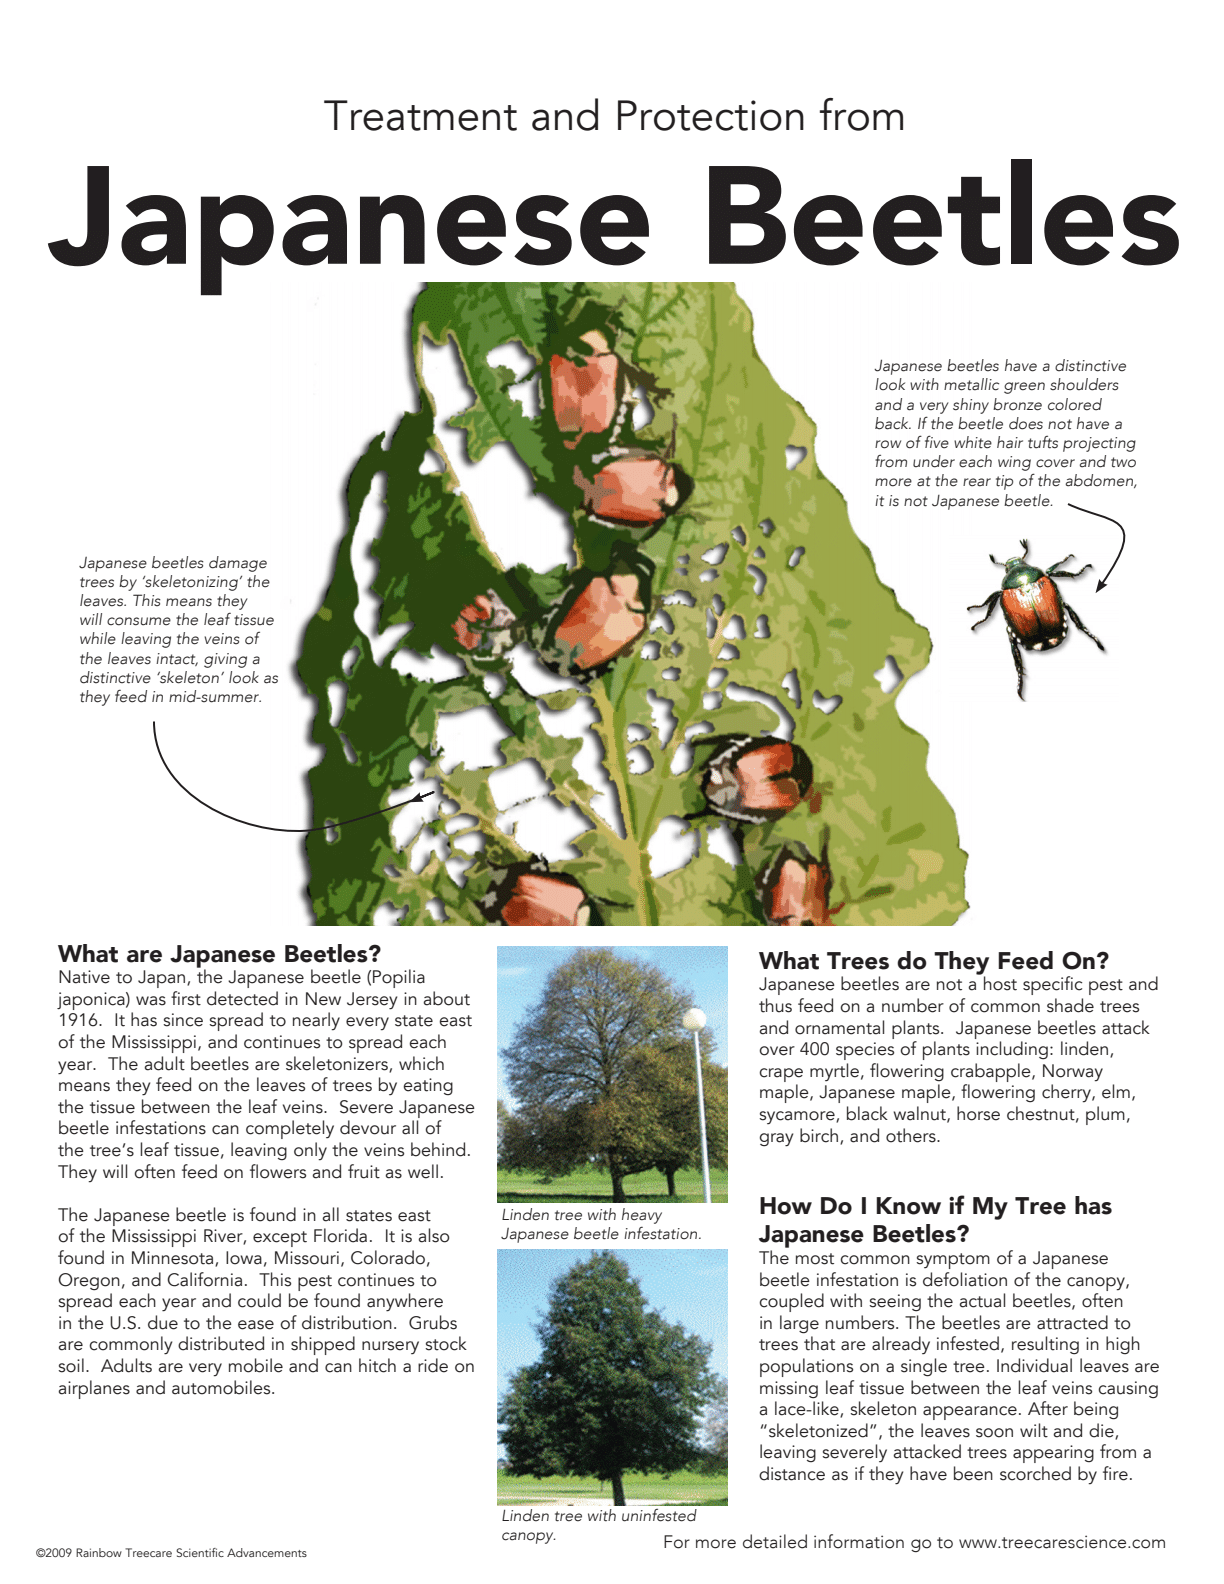 The image is an educational poster about treating and protecting from Japanese Beetles, describing their impact on trees, appearance, and feeding habits.